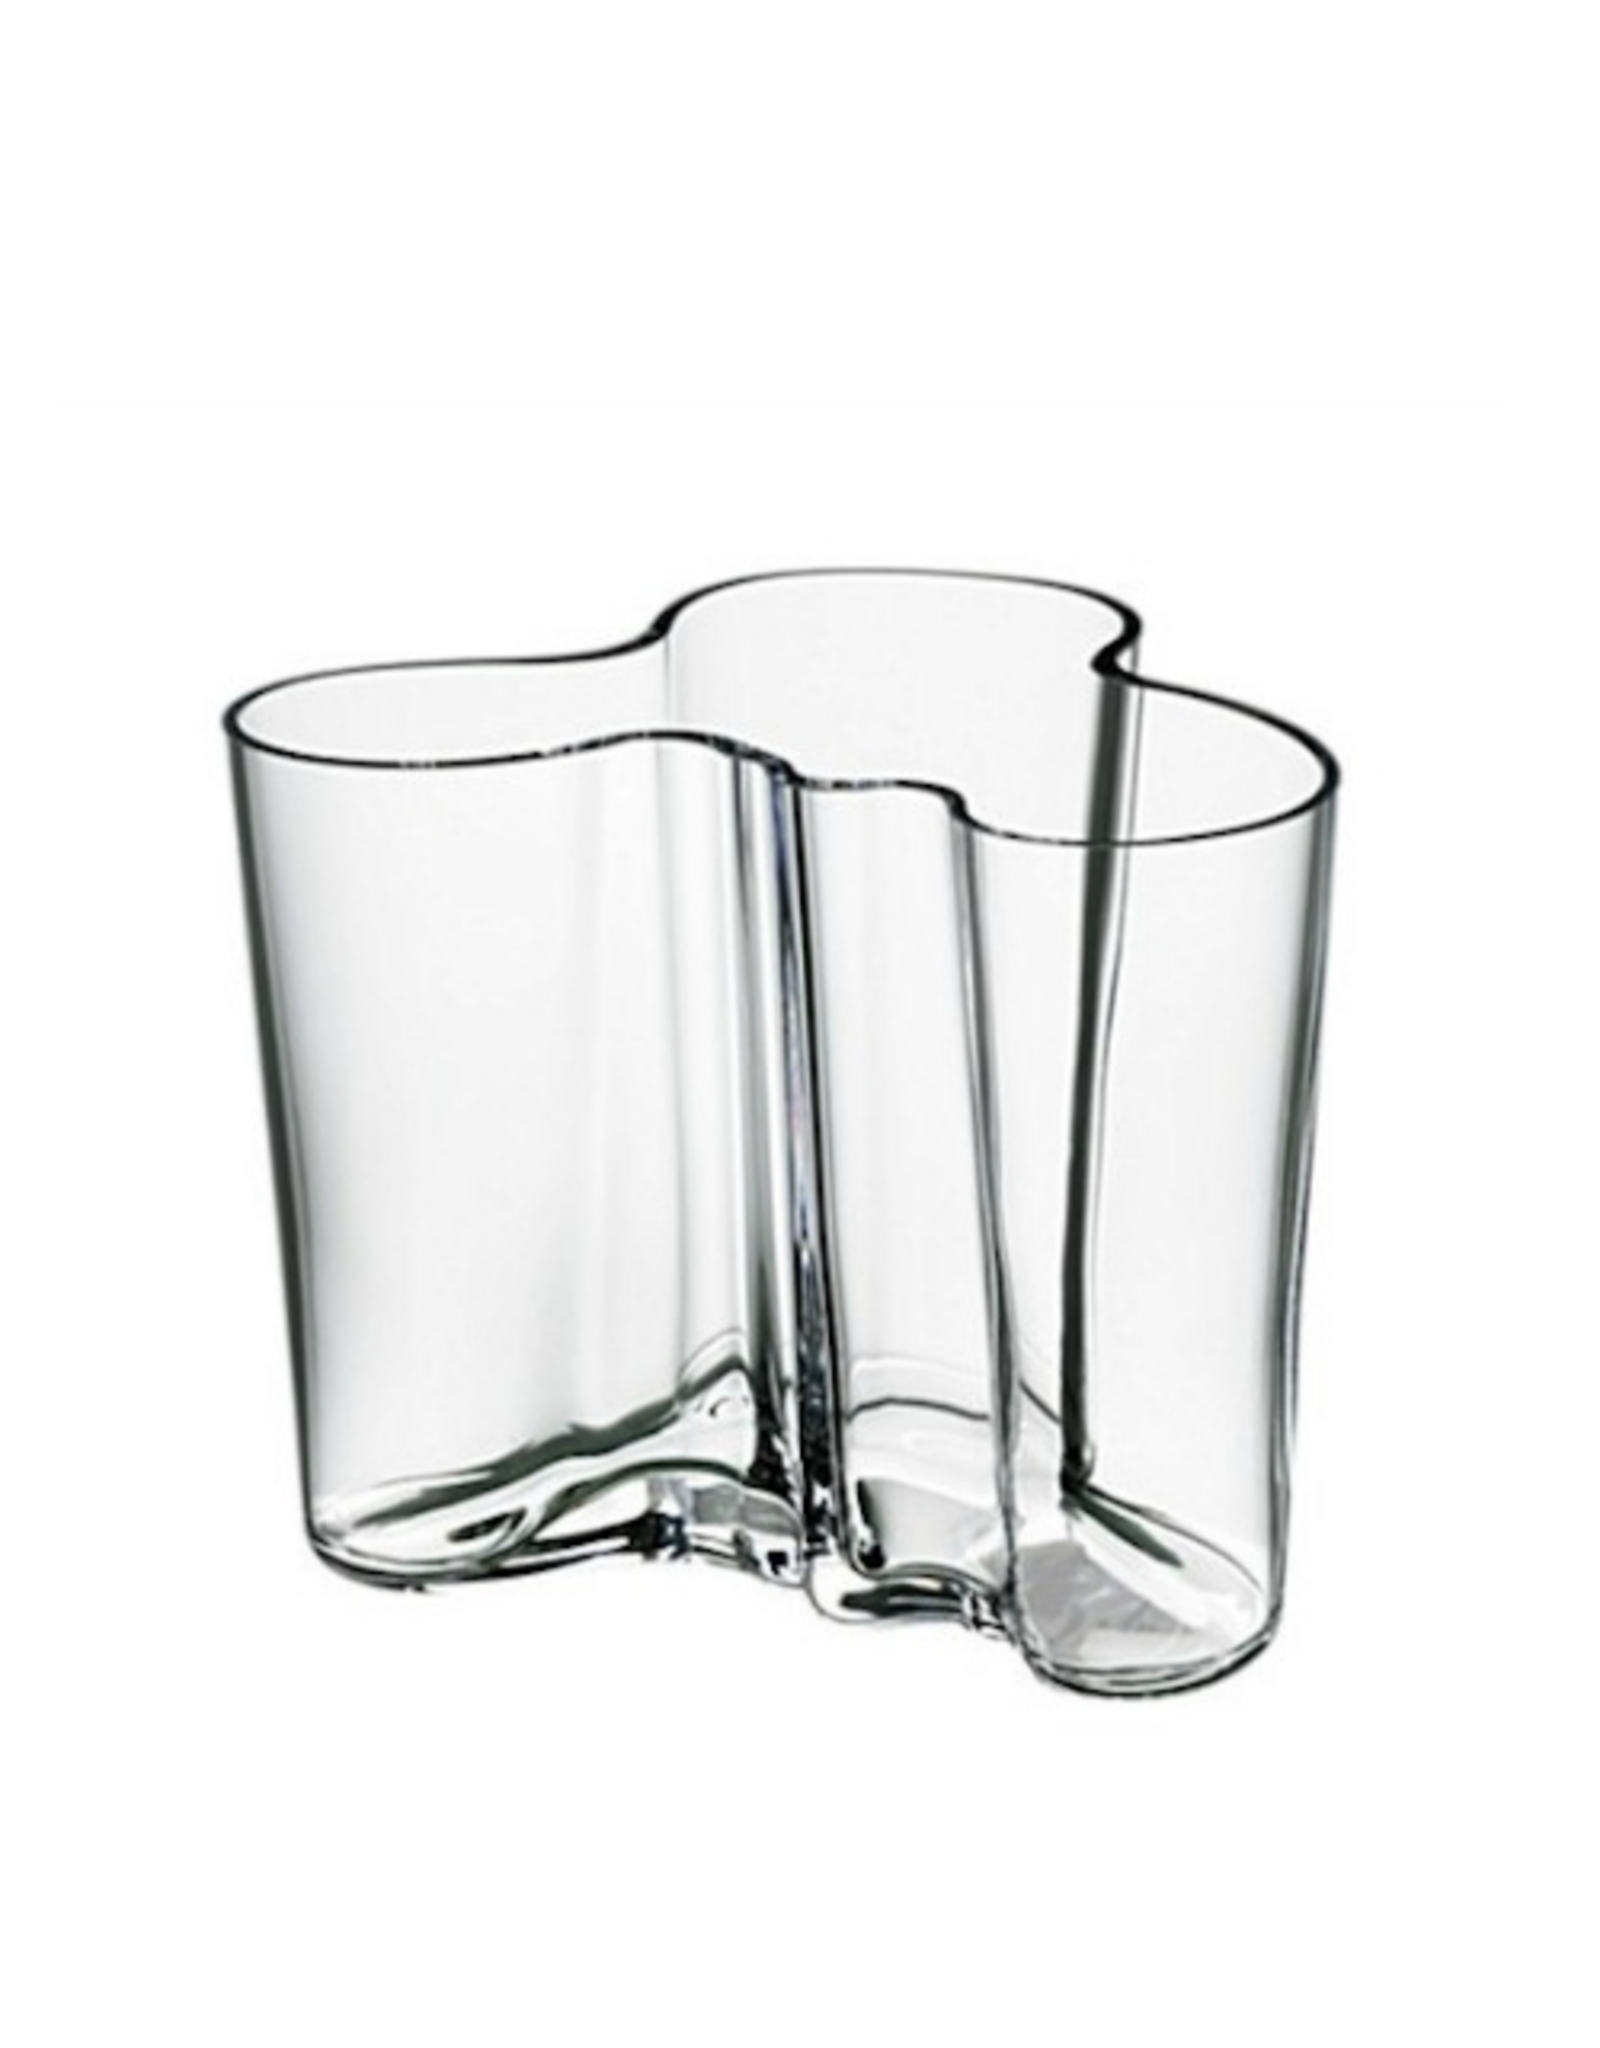 AALTO VASE, 160 MM - CLEAR